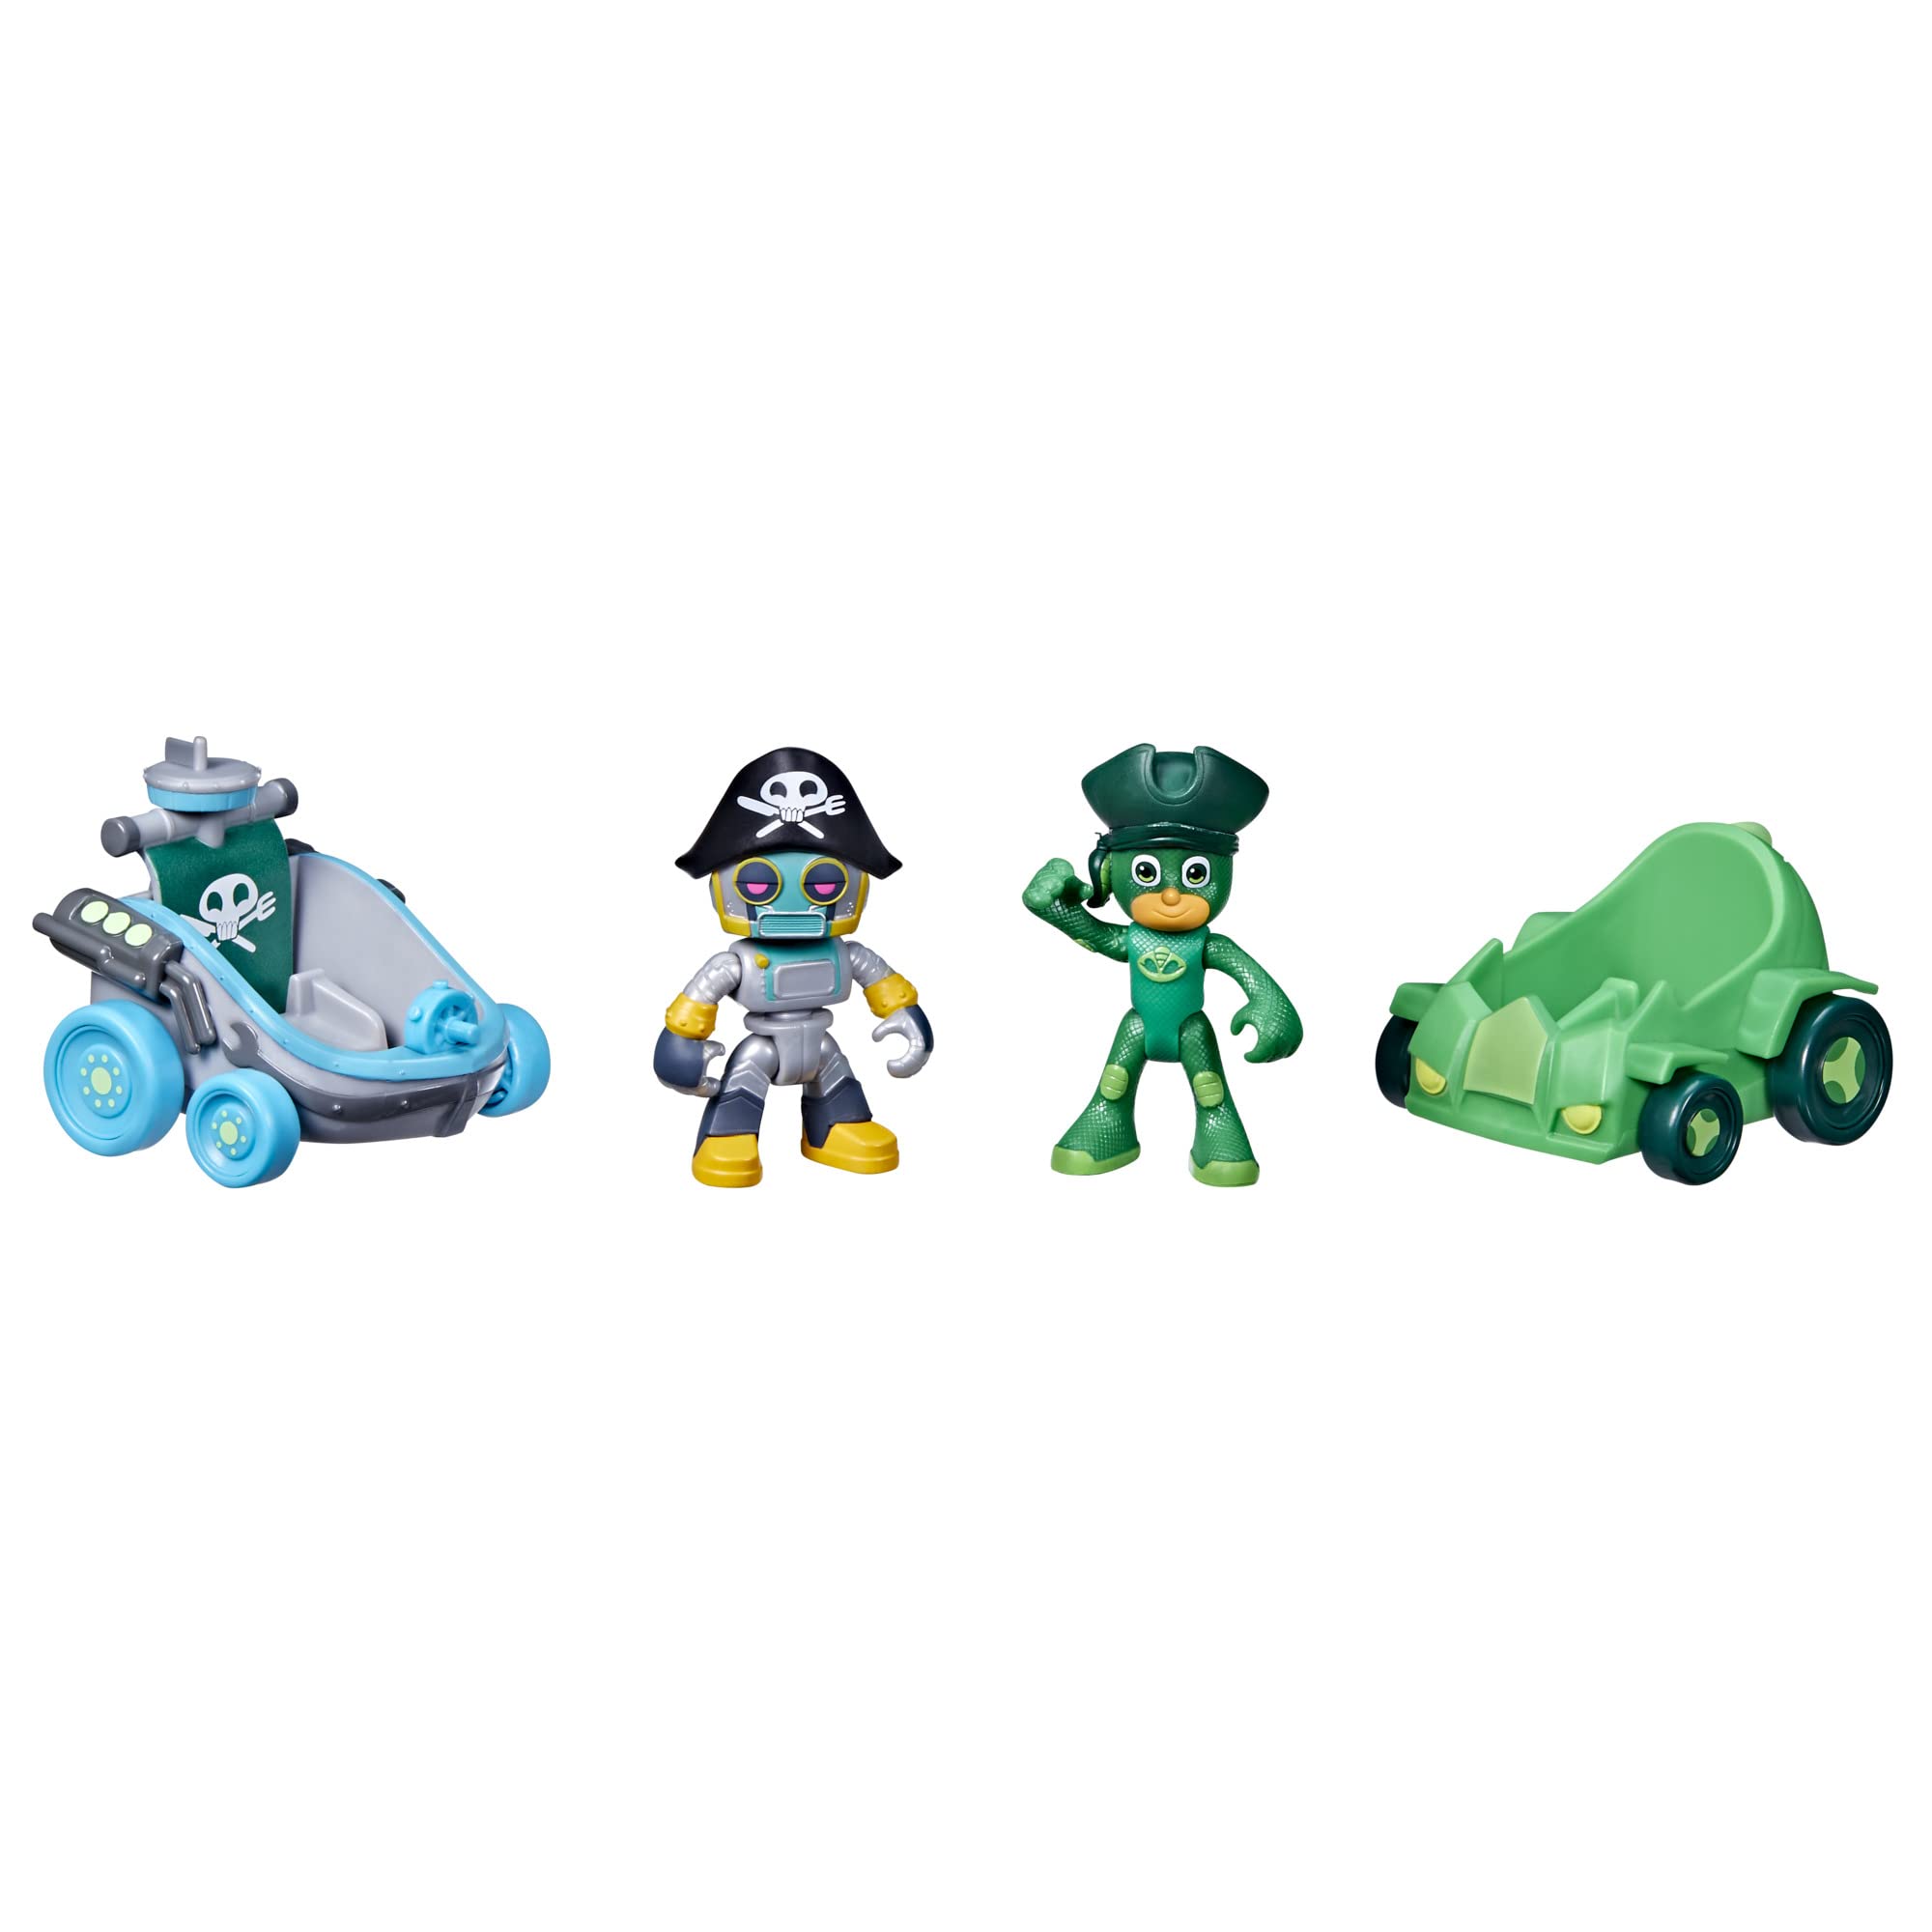 PJ Masks Pirate Power Gekko vs Pirate Robot Battle Racers Preschool Toy, Vehicle and Action Figure Set for Kids Ages 3 and Up